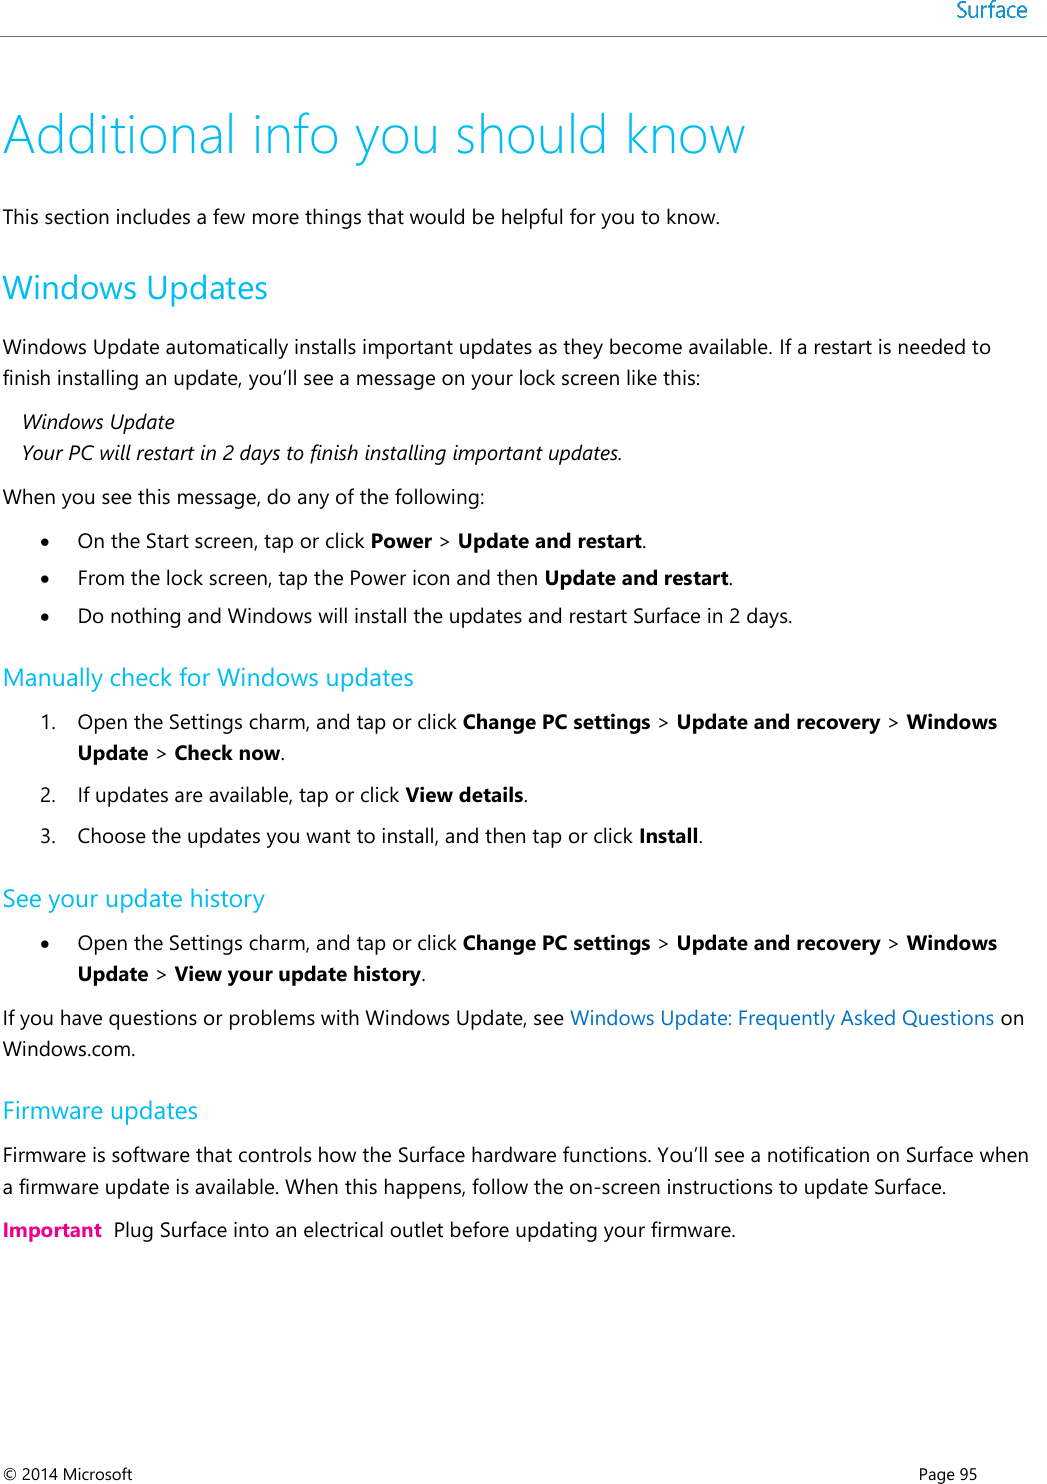  © 2014 Microsoft      Page 95  Additional info you should know This section includes a few more things that would be helpful for you to know.  Windows Updates Windows Update automatically installs important updates as they become available. If a restart is needed to finish installing an update, you’ll see a message on your lock screen like this:  Windows Update Your PC will restart in 2 days to finish installing important updates. When you see this message, do any of the following:  On the Start screen, tap or click Power &gt; Update and restart.   From the lock screen, tap the Power icon and then Update and restart.   Do nothing and Windows will install the updates and restart Surface in 2 days. Manually check for Windows updates 1. Open the Settings charm, and tap or click Change PC settings &gt; Update and recovery &gt; Windows Update &gt; Check now.  2. If updates are available, tap or click View details. 3. Choose the updates you want to install, and then tap or click Install.  See your update history  Open the Settings charm, and tap or click Change PC settings &gt; Update and recovery &gt; Windows Update &gt; View your update history.  If you have questions or problems with Windows Update, see Windows Update: Frequently Asked Questions on Windows.com. Firmware updates Firmware is software that controls how the Surface hardware functions. You’ll see a notification on Surface when a firmware update is available. When this happens, follow the on-screen instructions to update Surface.  Important  Plug Surface into an electrical outlet before updating your firmware.  